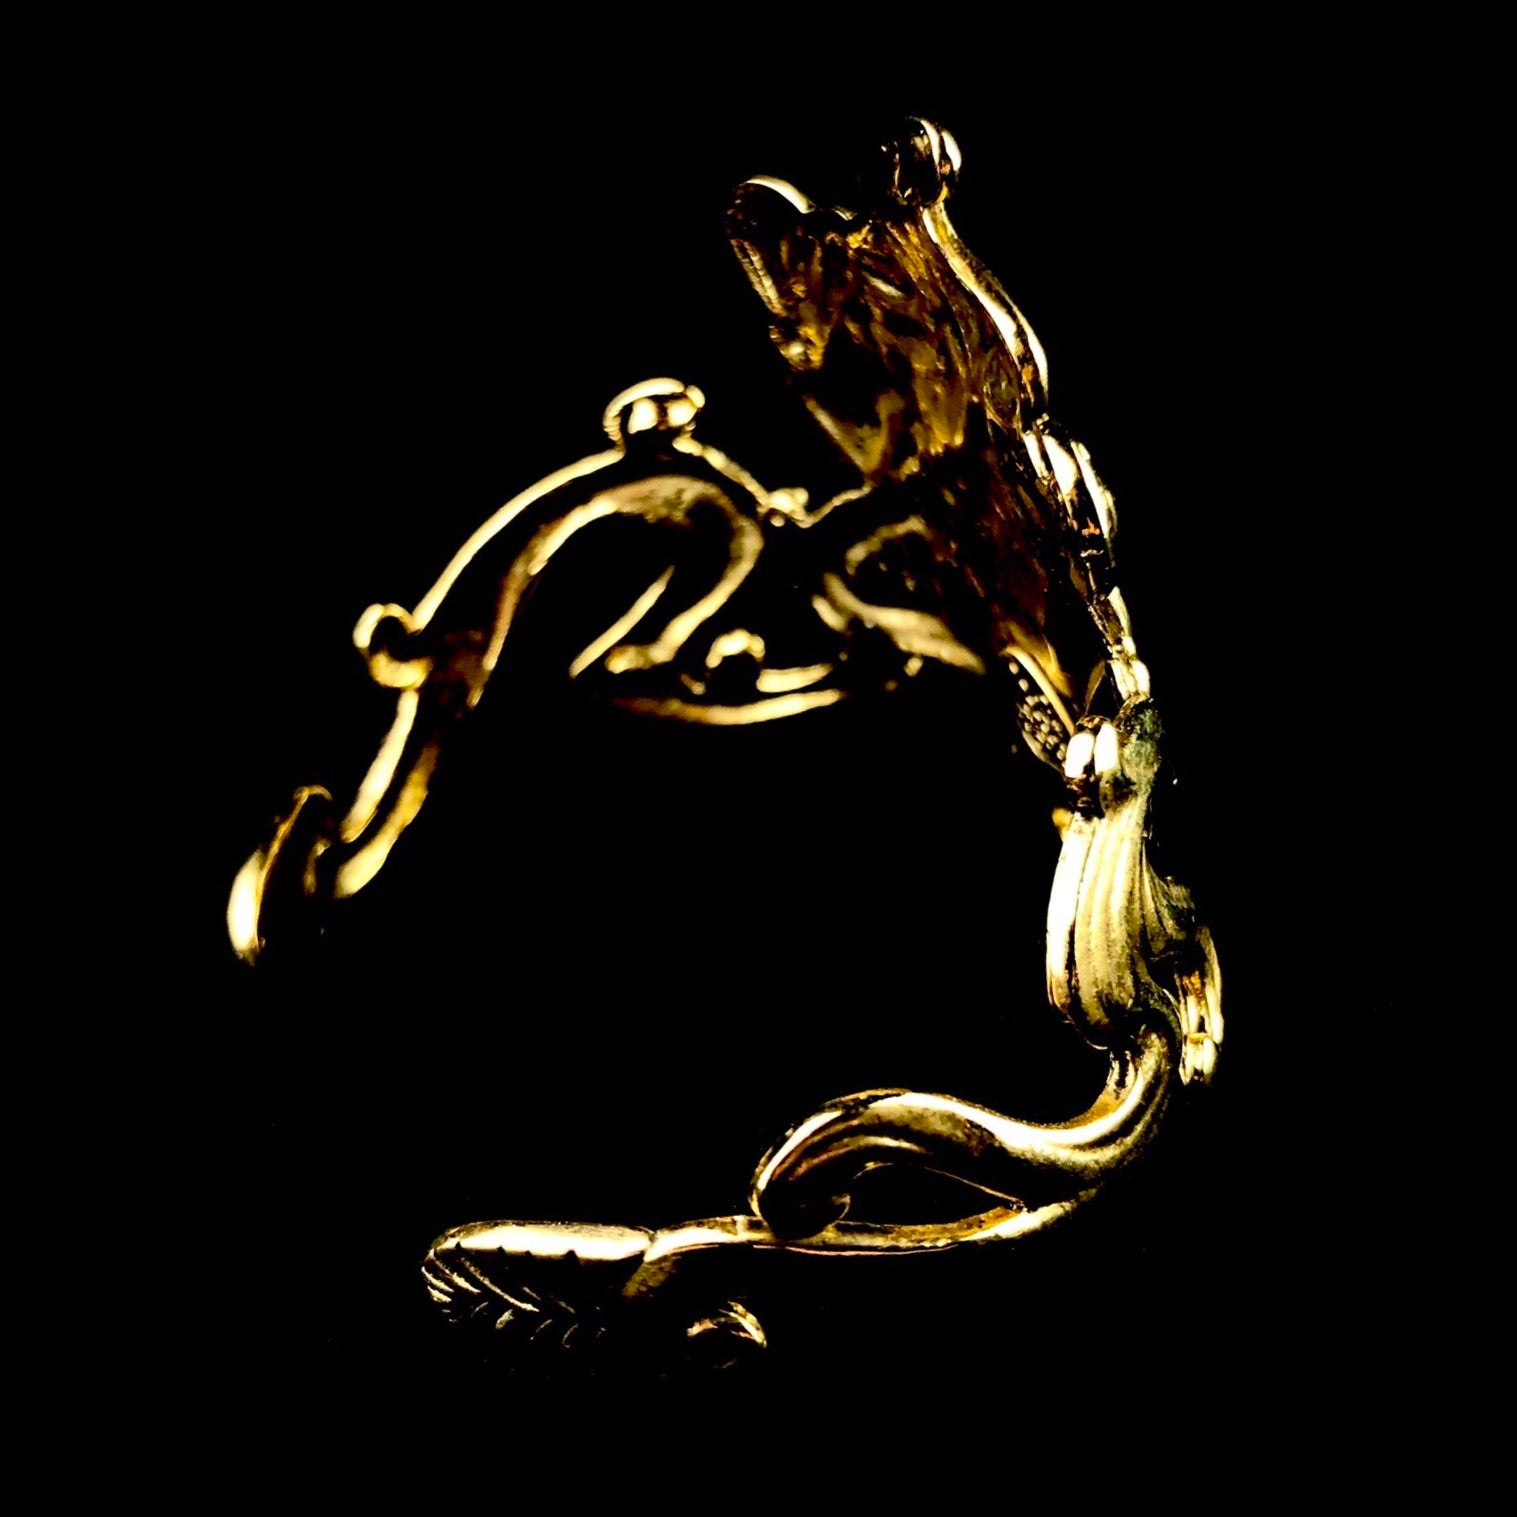 Golden cuff shown from above